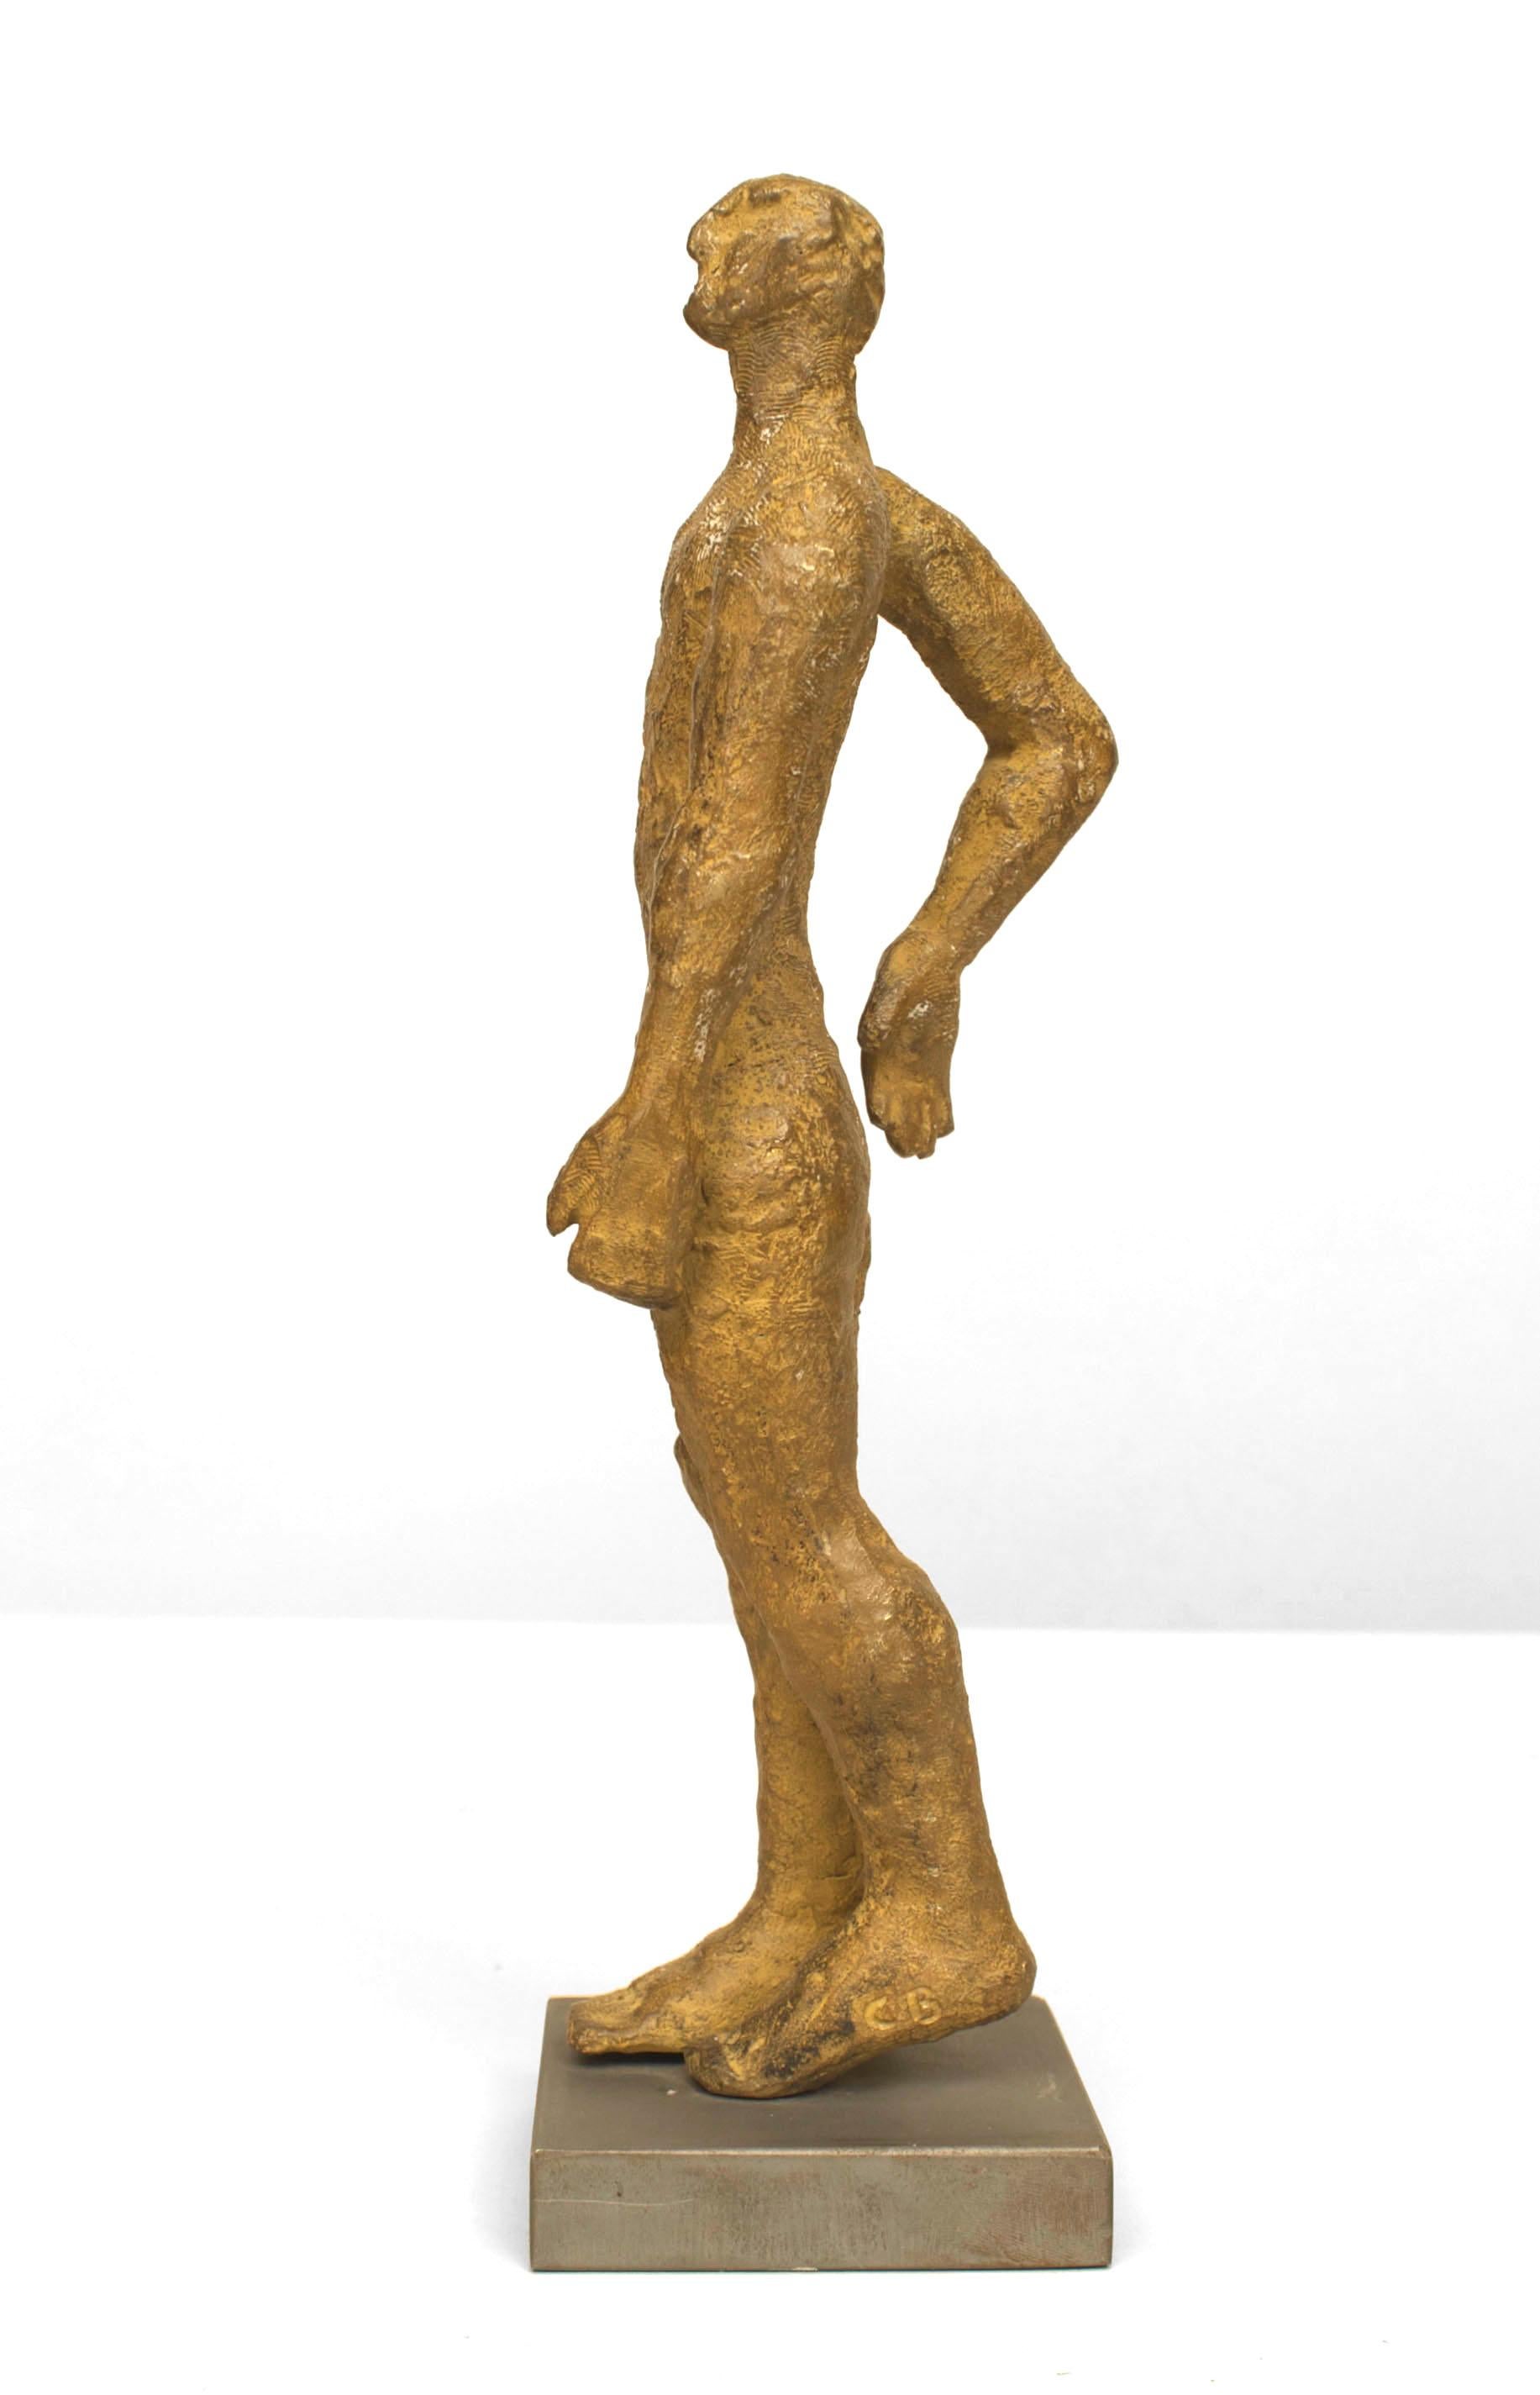 American Post-Modern Design gold patina bronze sculpture of a standing figure with 1 arm bend and the other straight on a square base. (signed: CAROL BRUNS, titled 